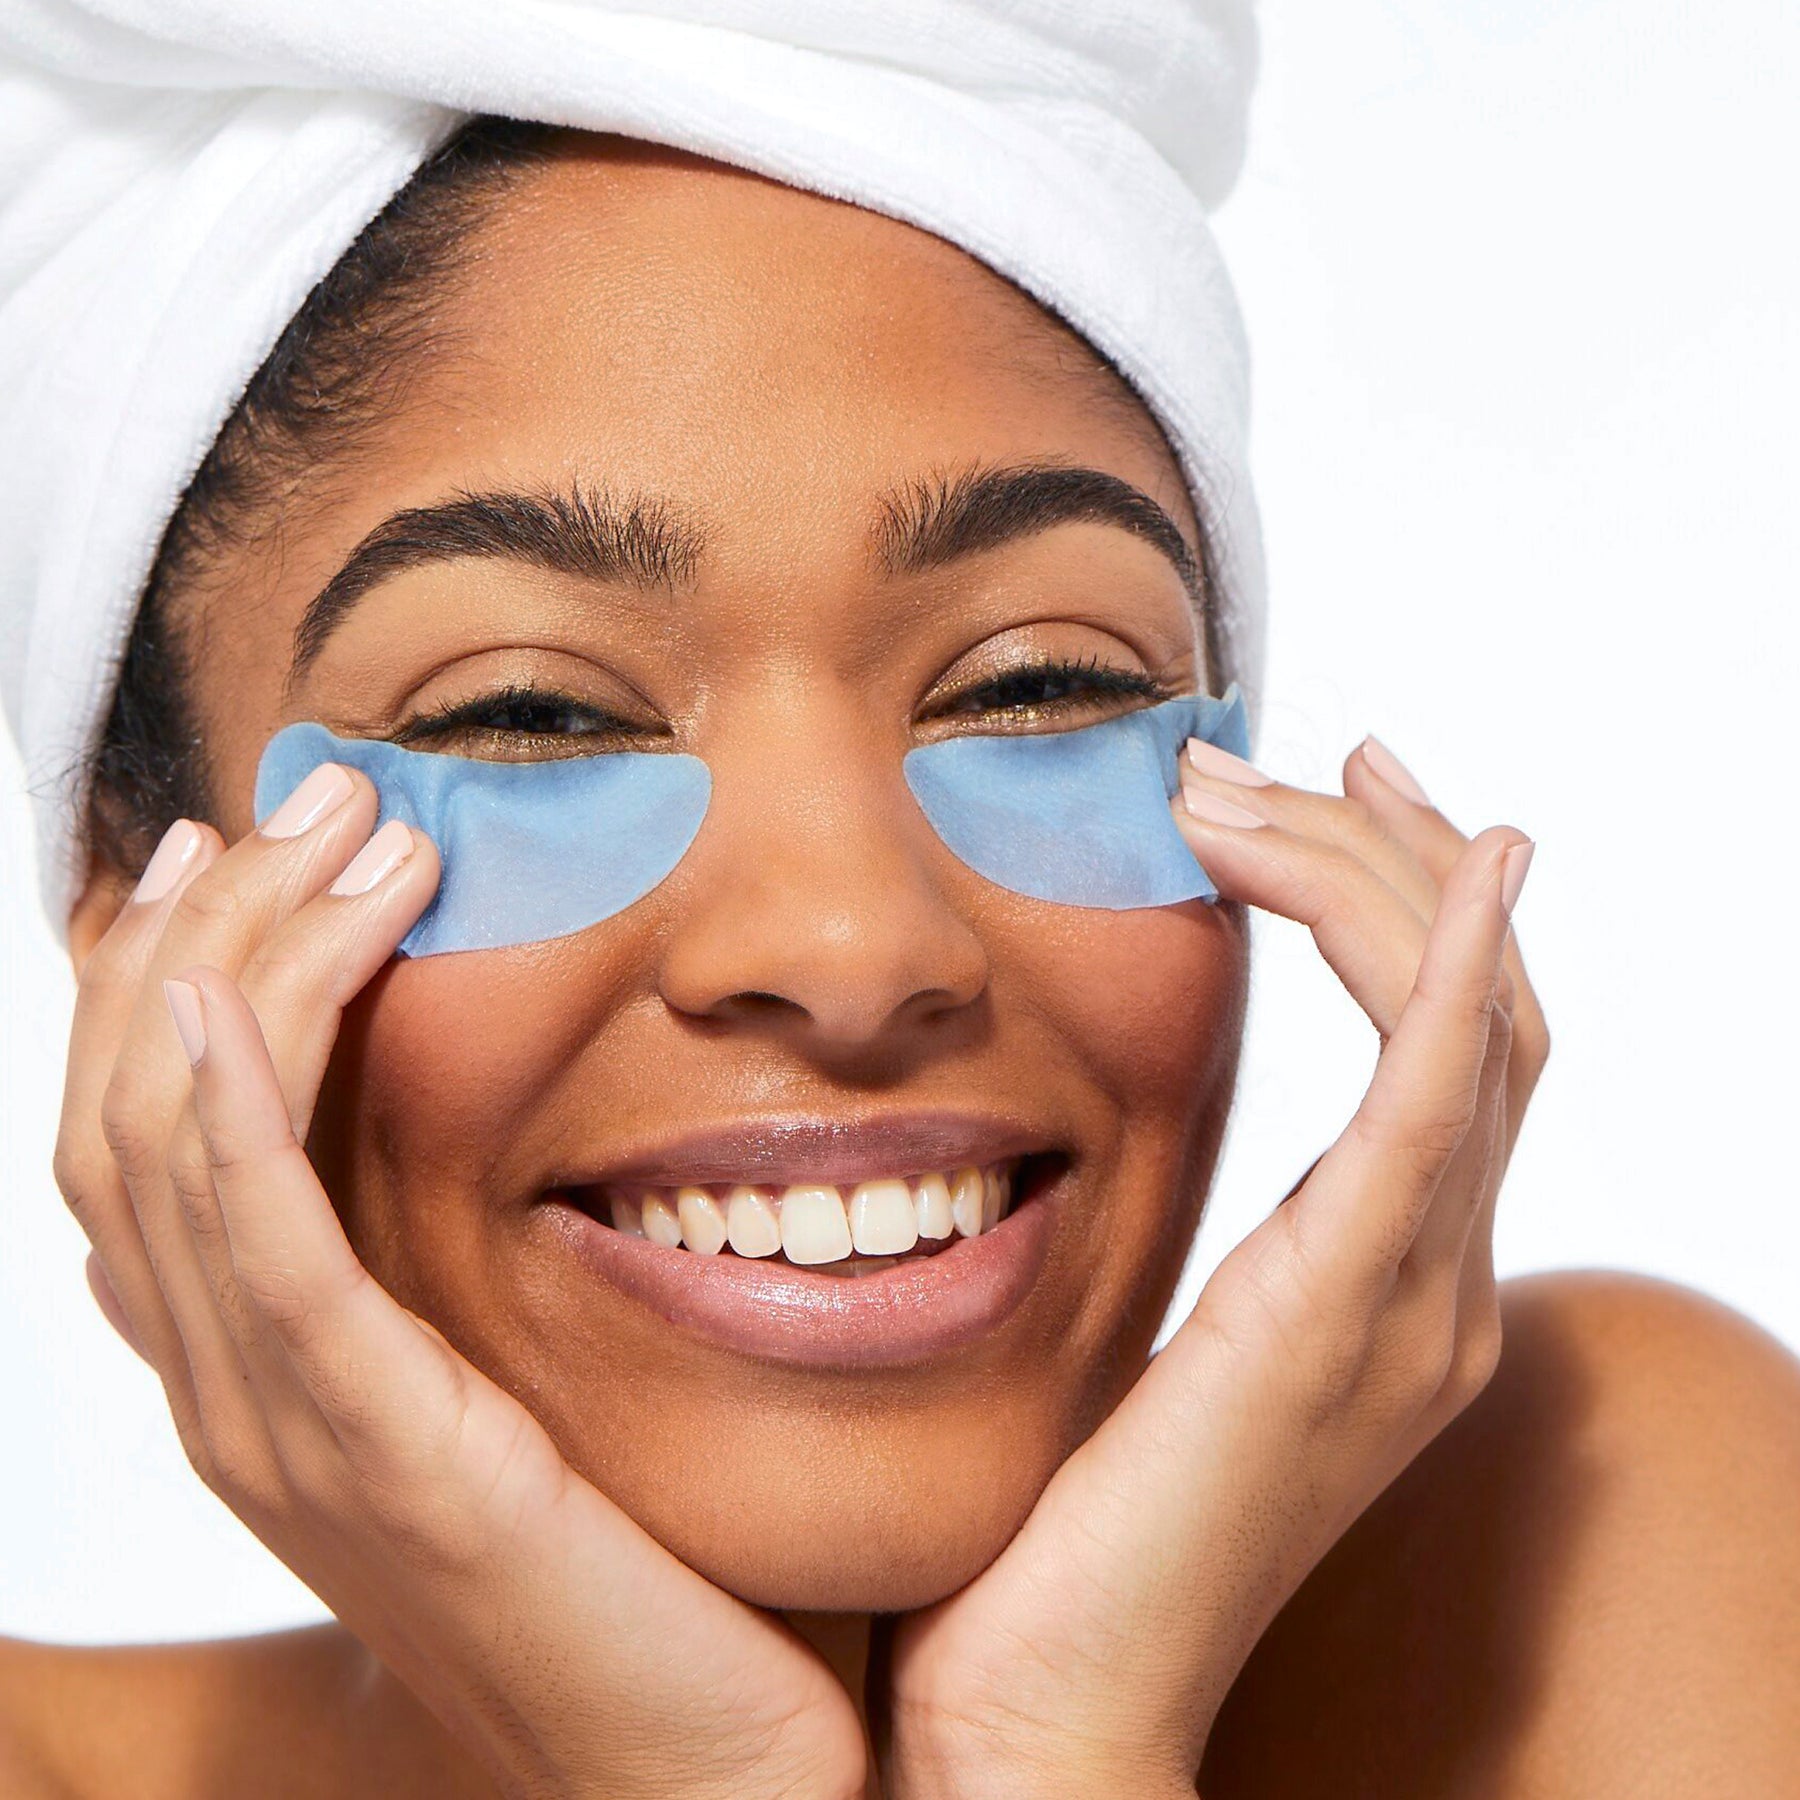 22 Best Under-Eye Patches to Treat Wrinkles, Dark Circles & Puffiness